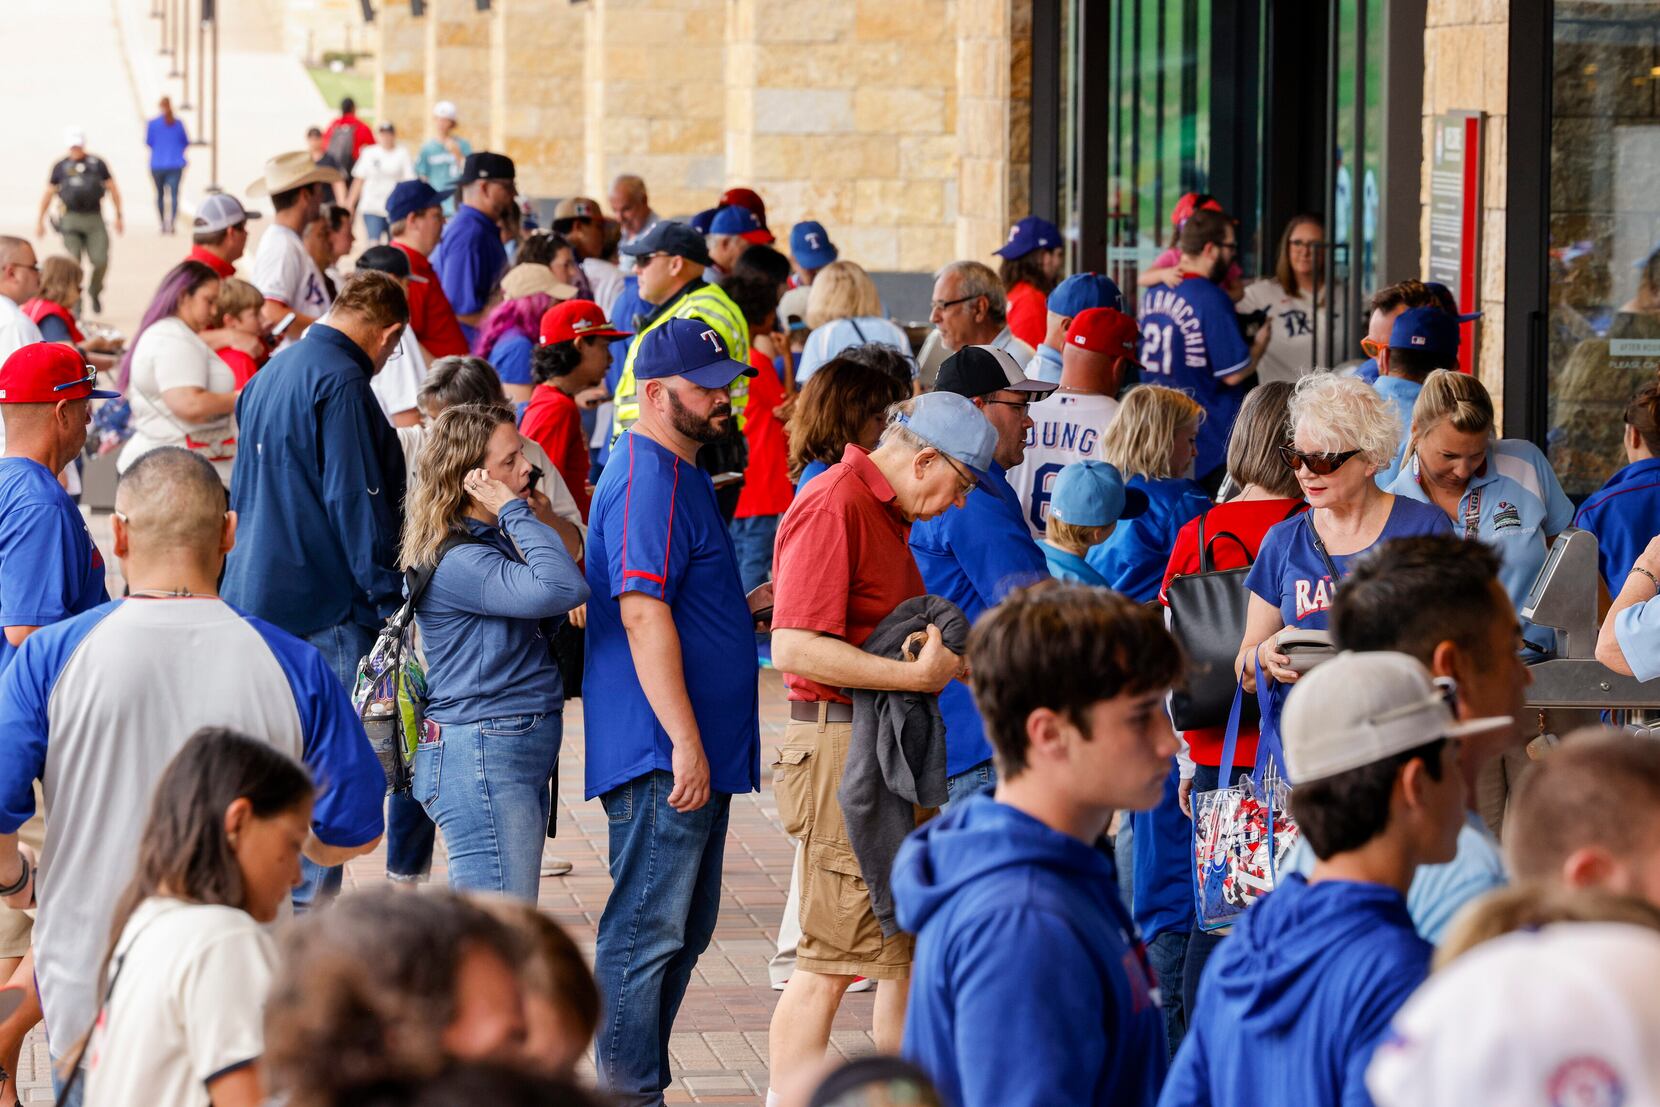 Cubs fans of all ages getting pumped about possibilities, Local News